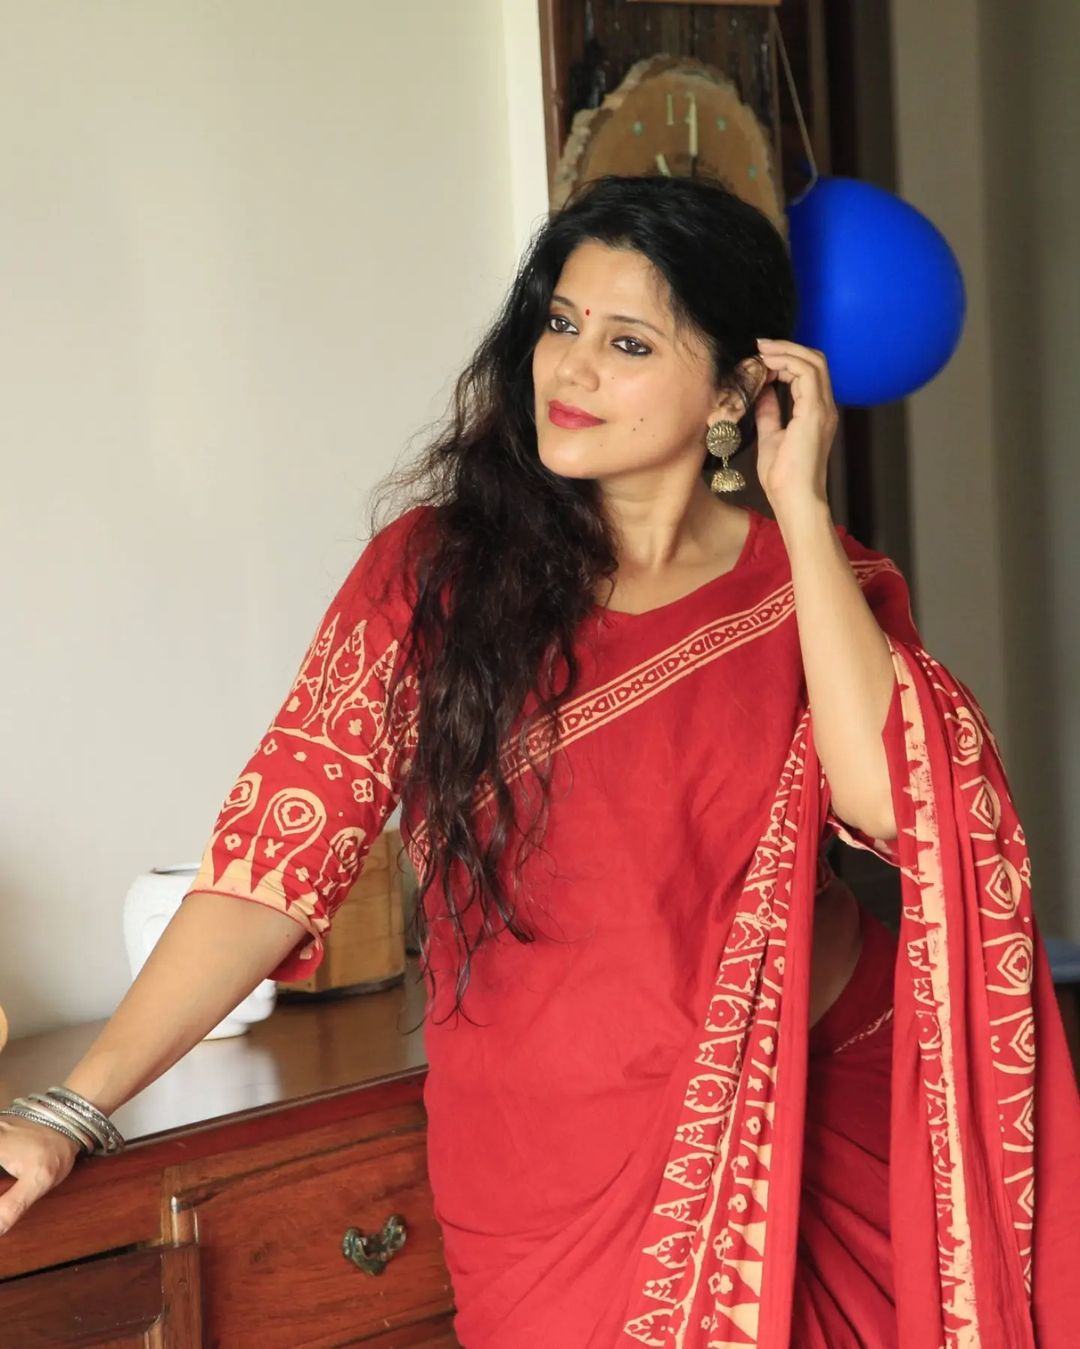 Music Heals Soul! See How Karuna Pandey’s Emotions Connected With Music And Dance!